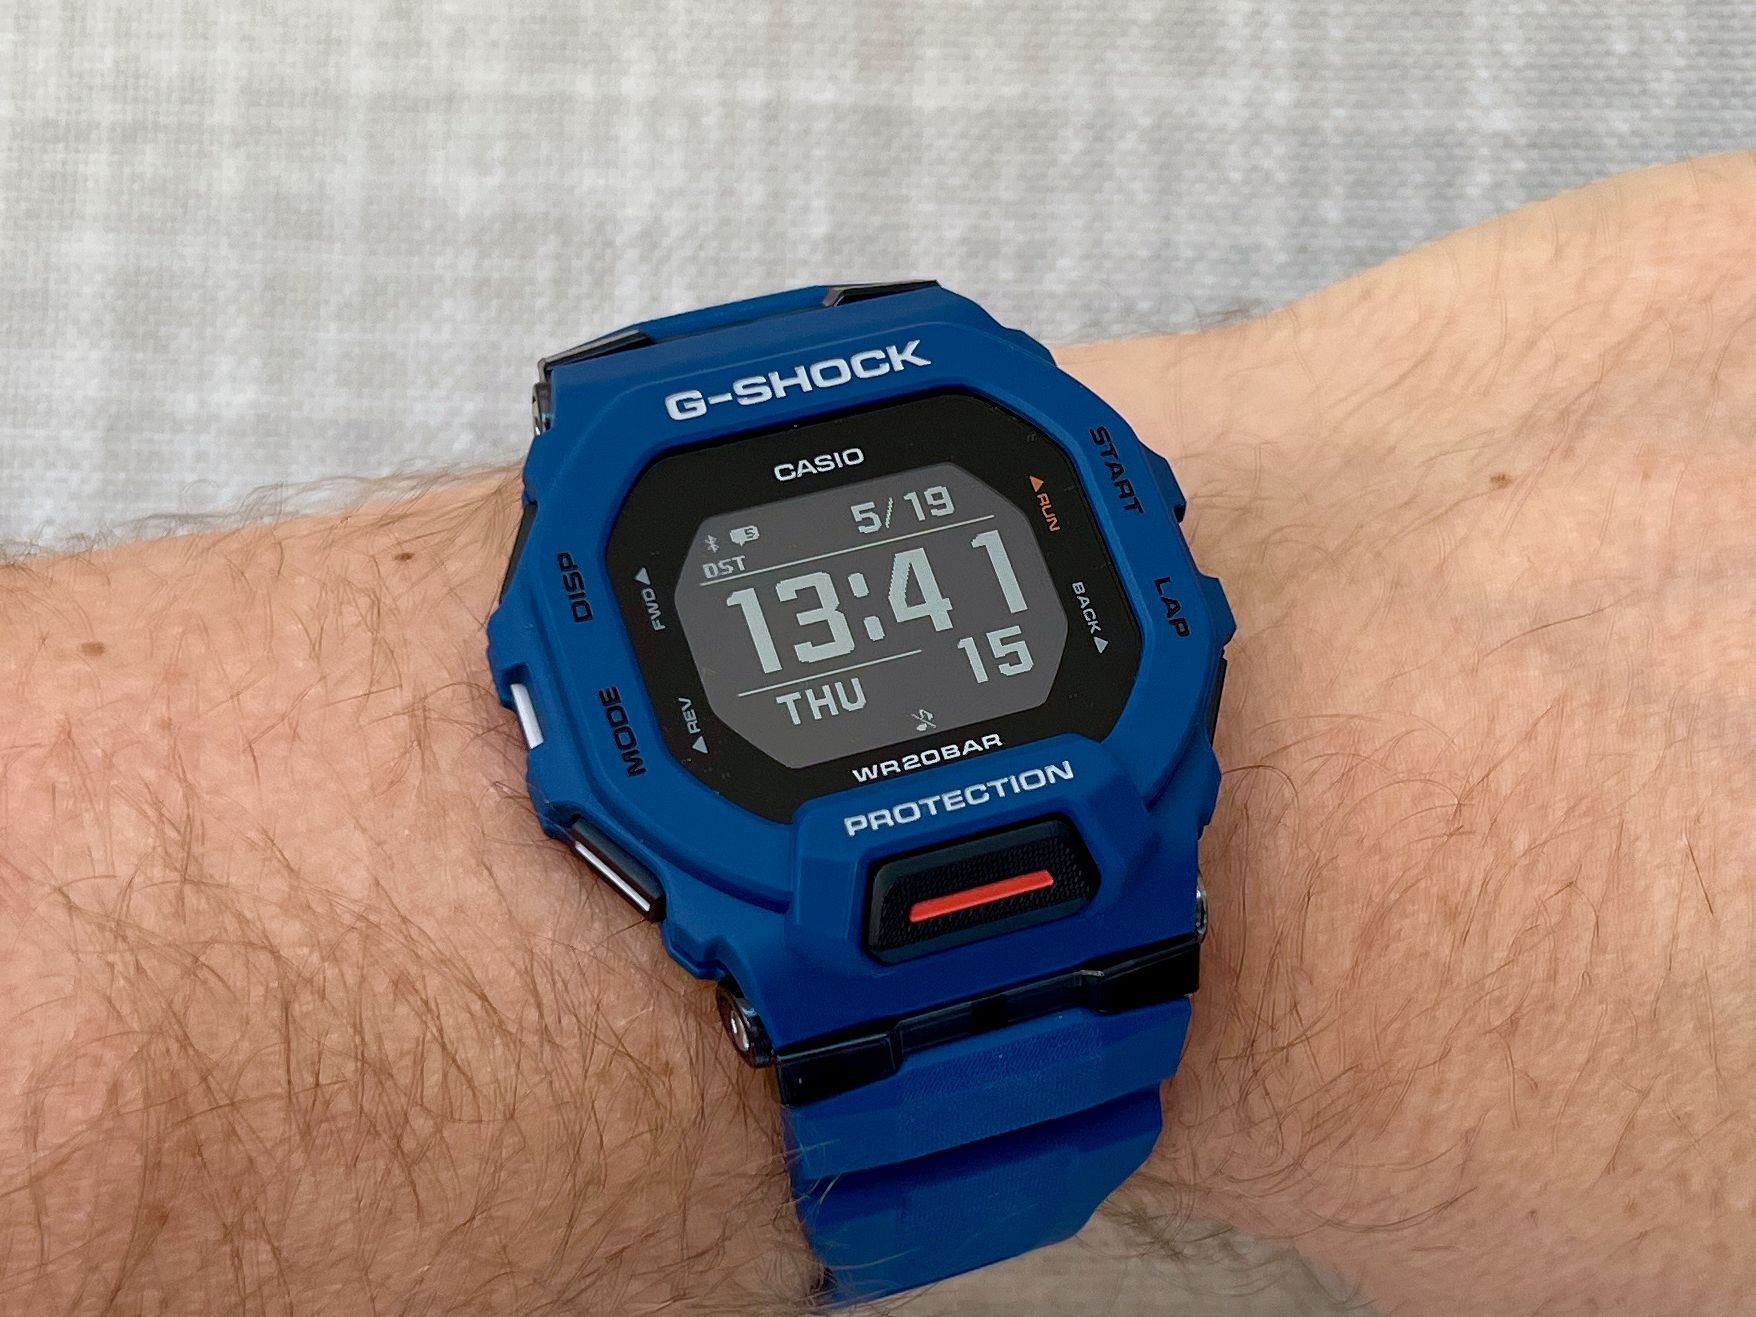 Another G-Shock - the GBD-200-2ER.